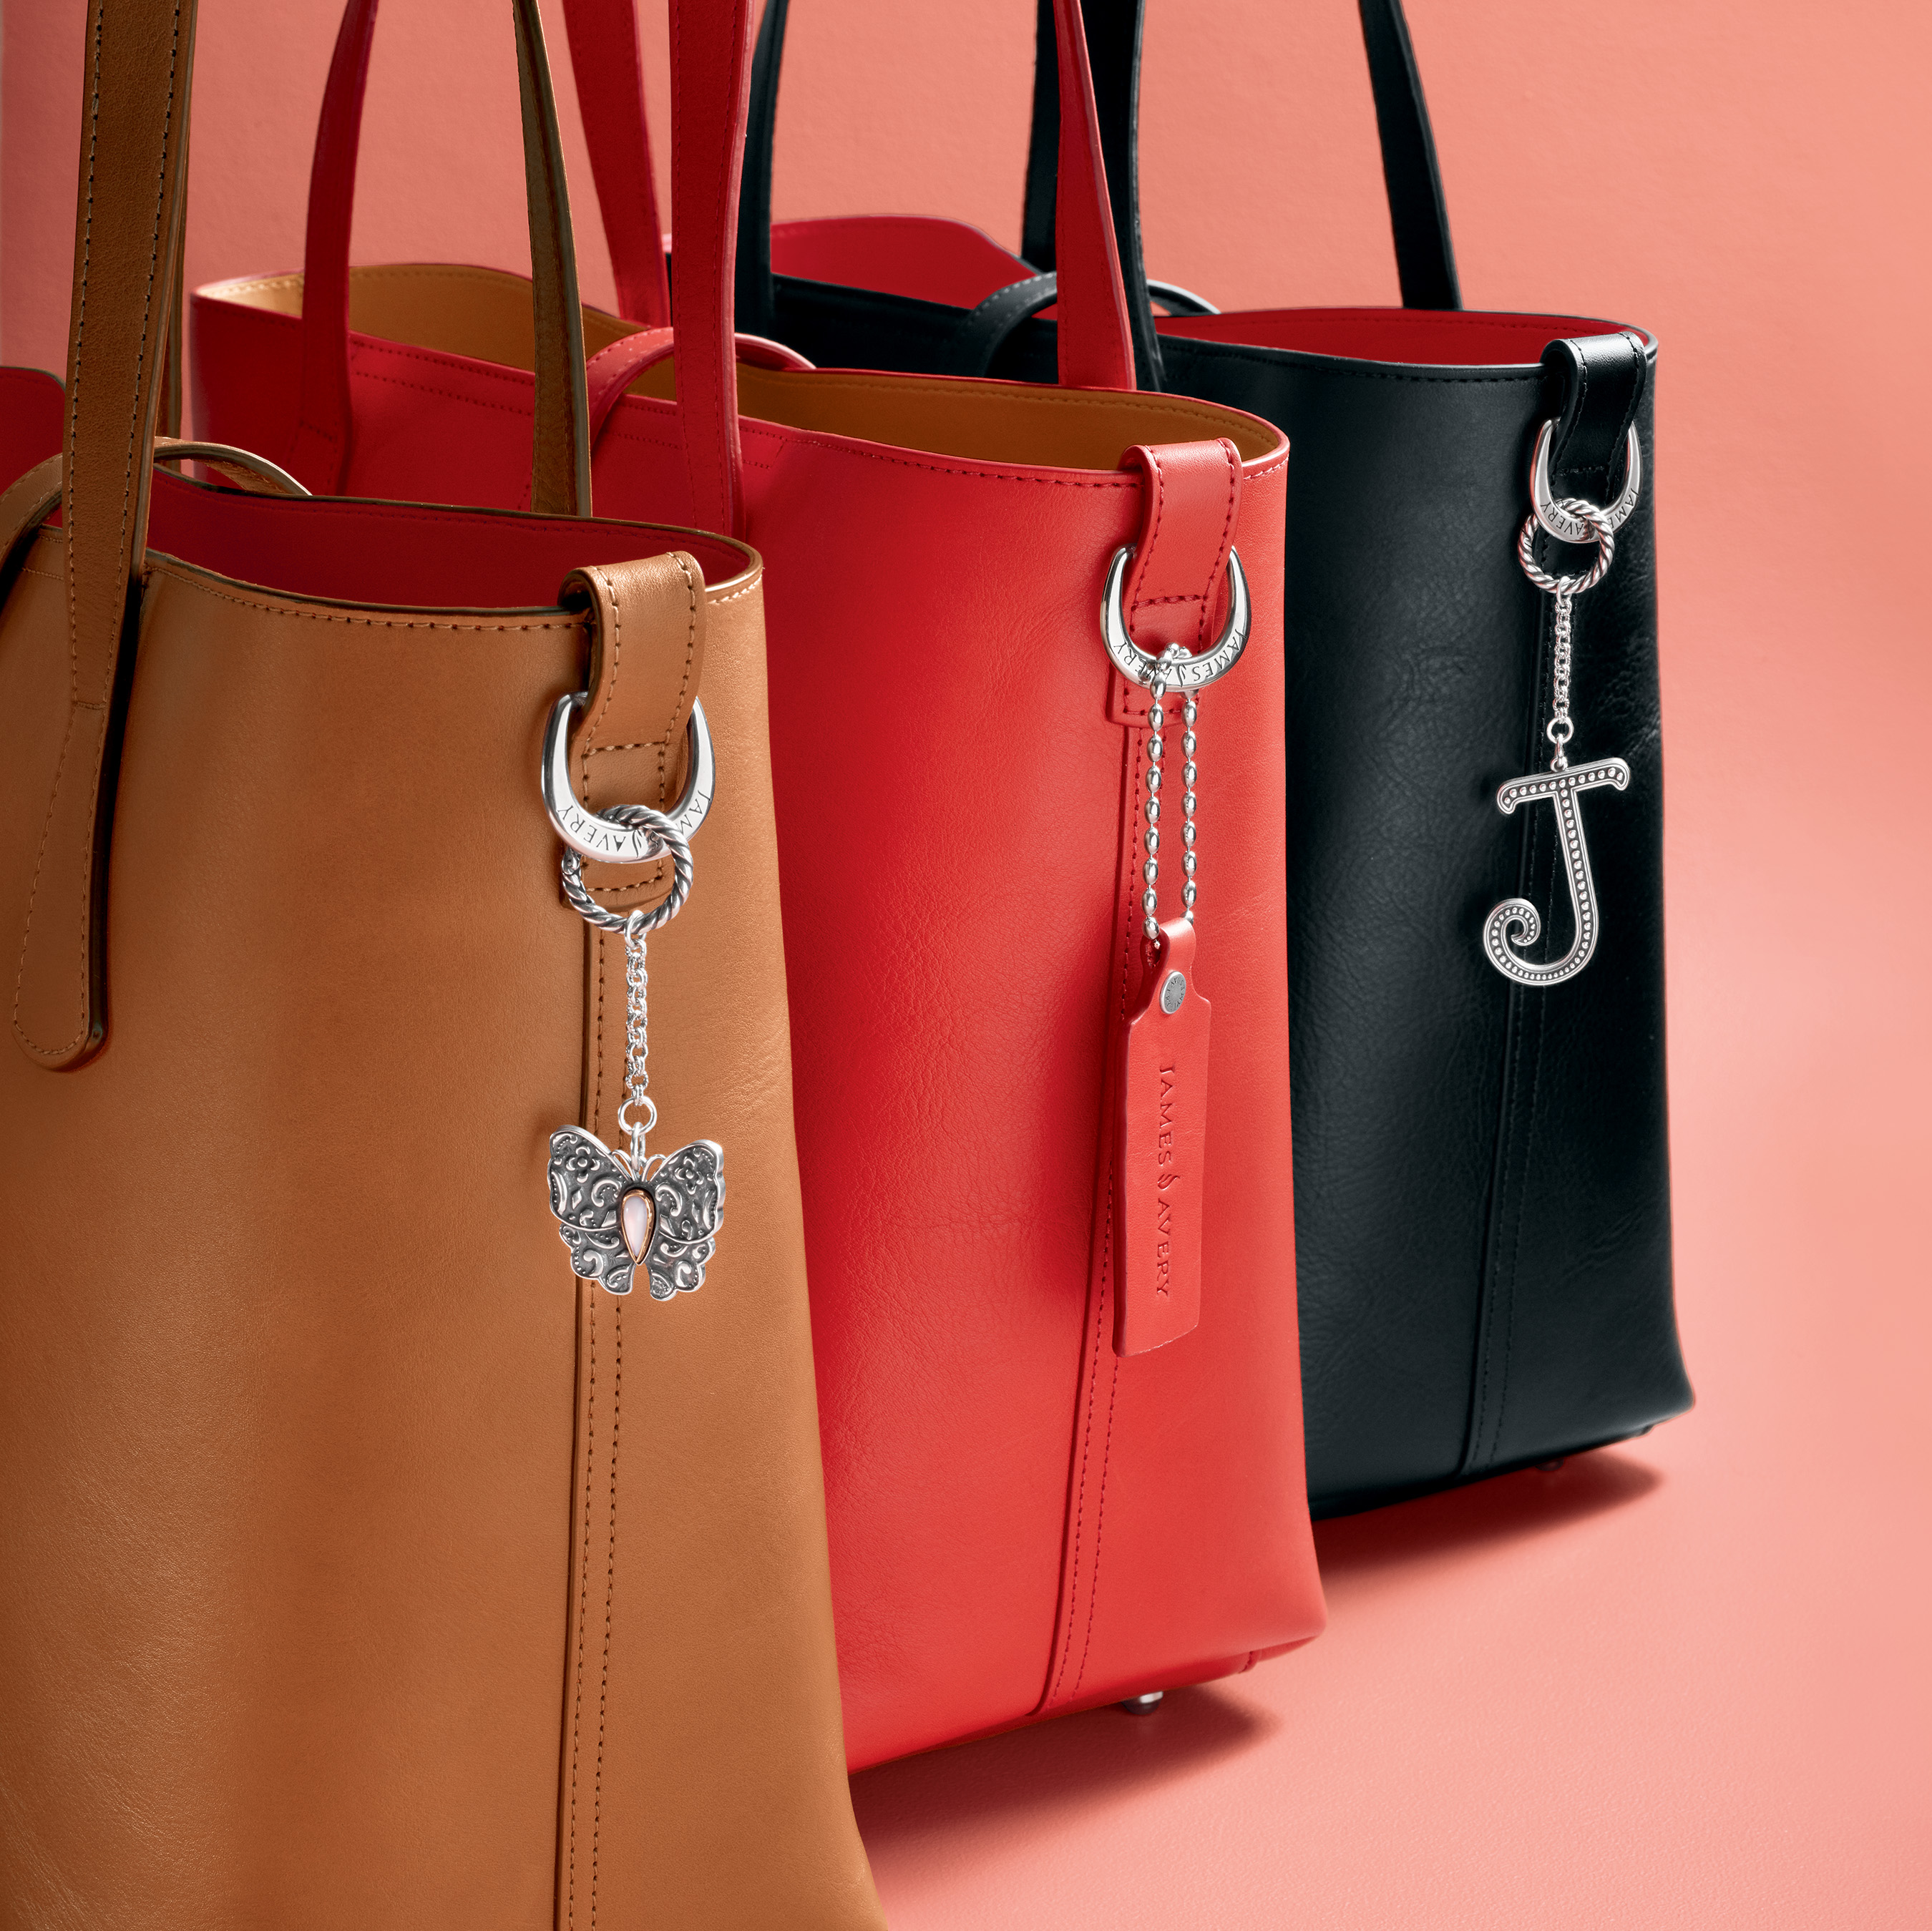 Crafted from premium-quality Italian leather treated to make the inside water resistant and more durable. Available in black, chestnut or red leather. Customize any handbag by purchasing a charm holder and select a personal charm.